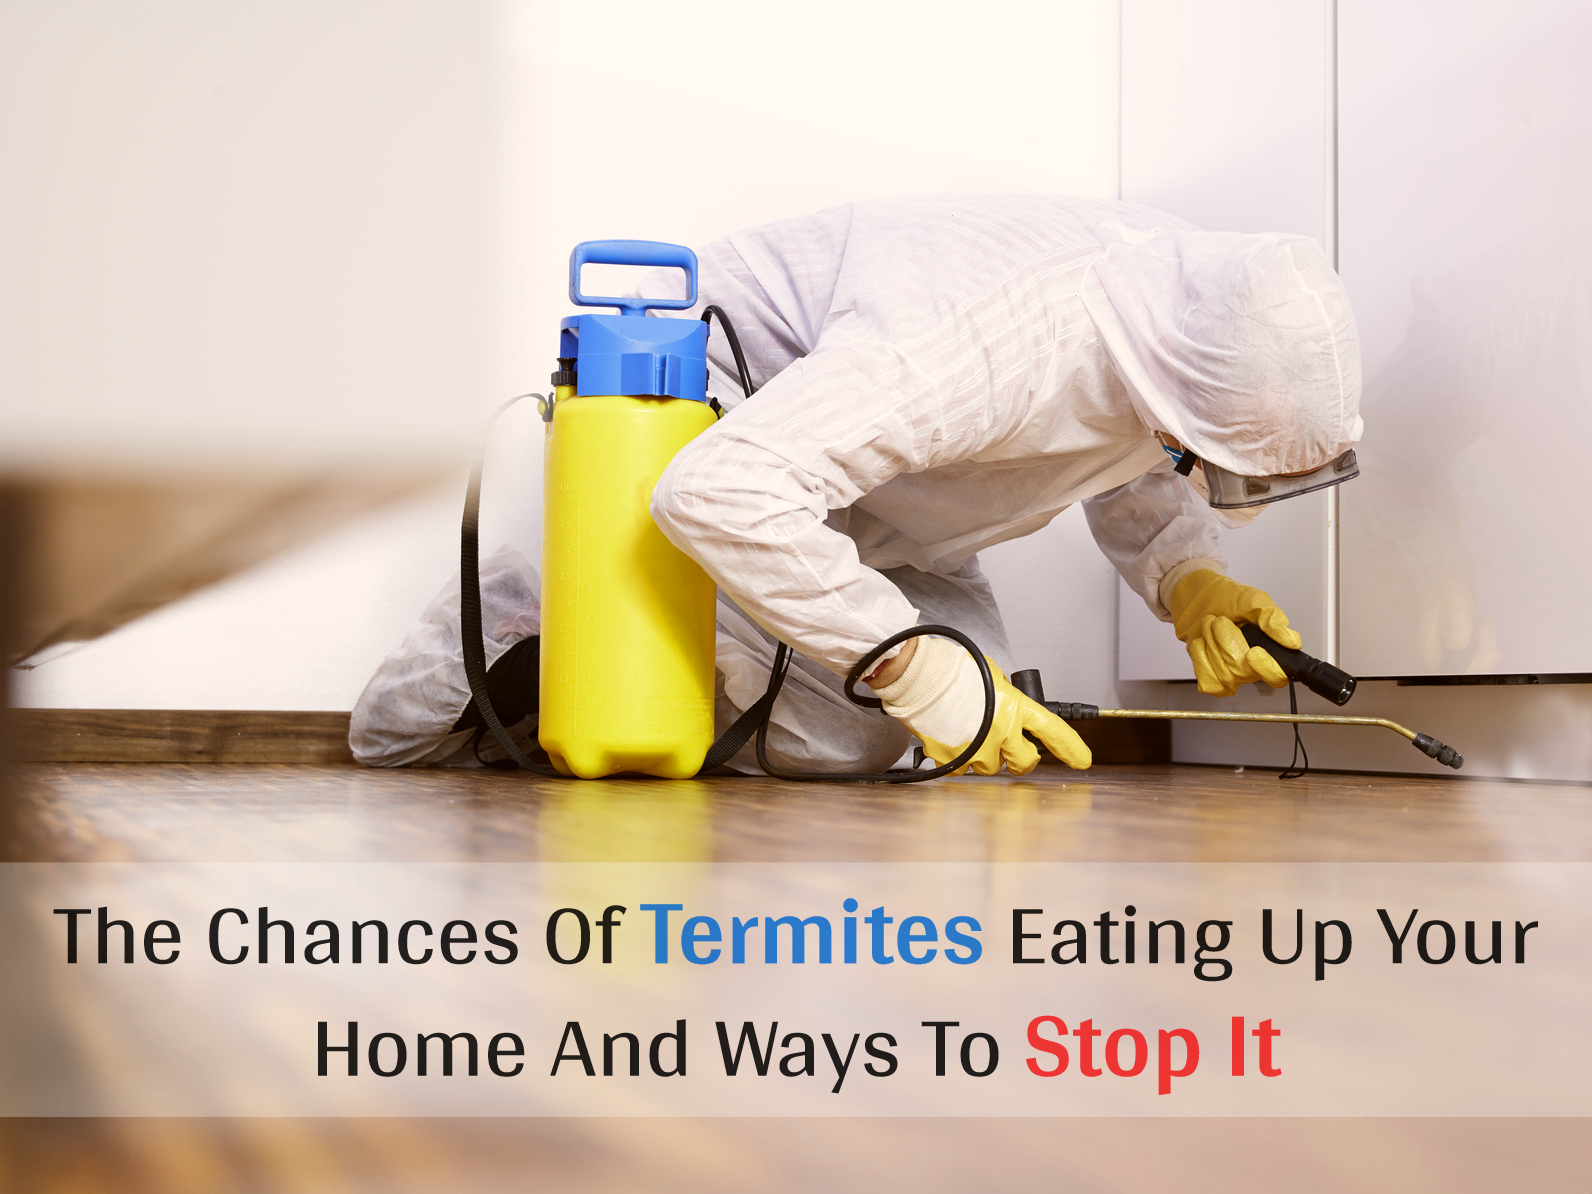 The Chances Of Termites Eating Up Your Home And Ways To Stop It